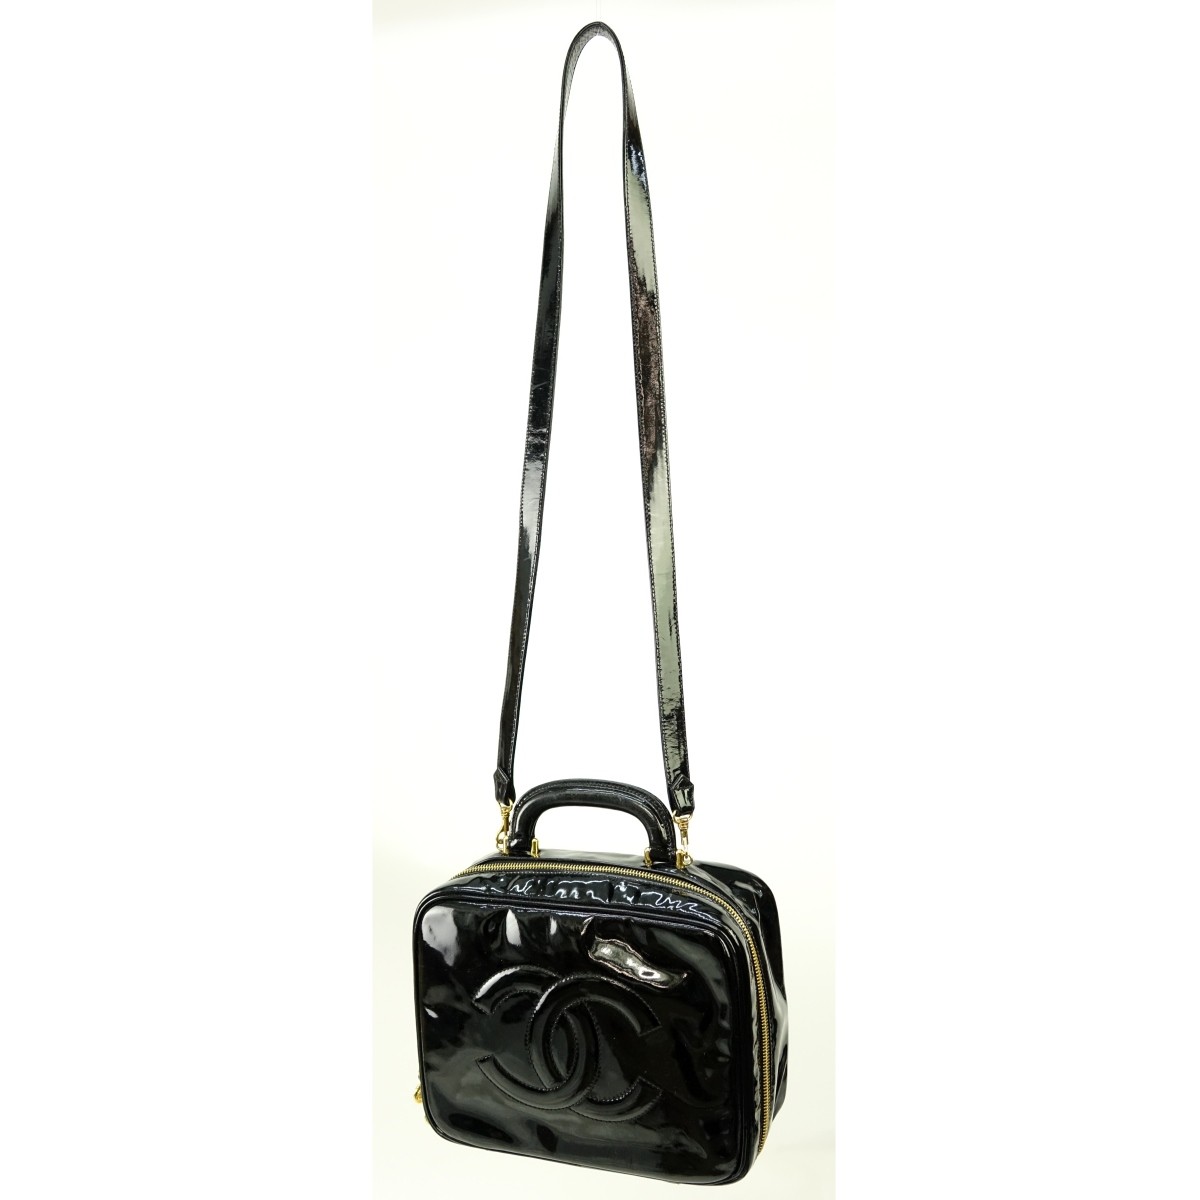 Chanel Black Patent Leather Cosmetic Shoulder Bag